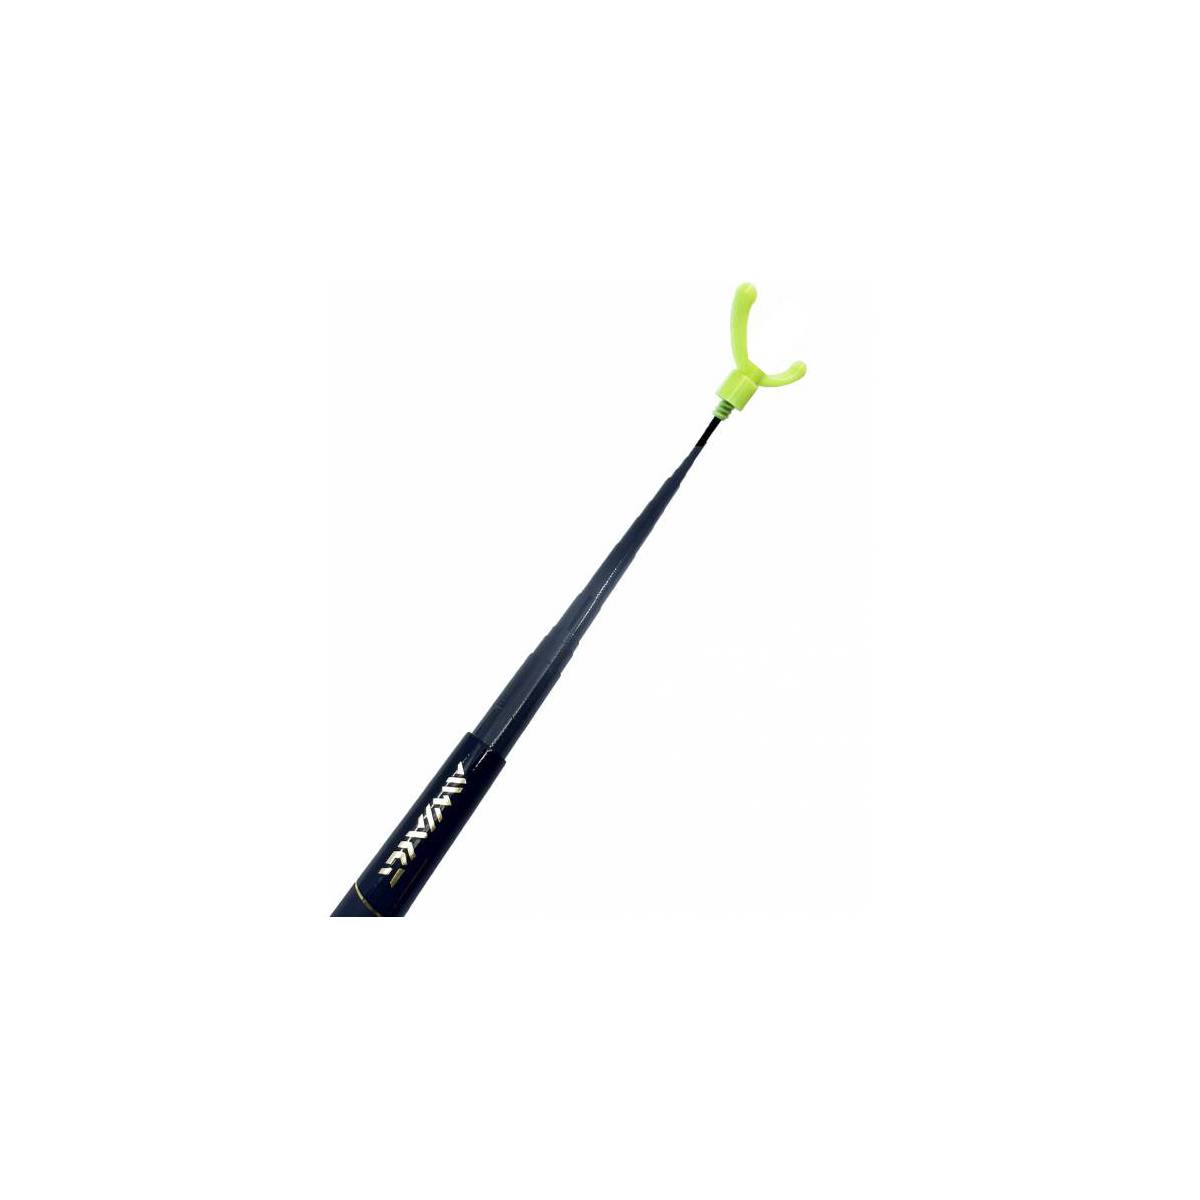 Telescopic pole/extractor for geocaching in fiberglass with fitted